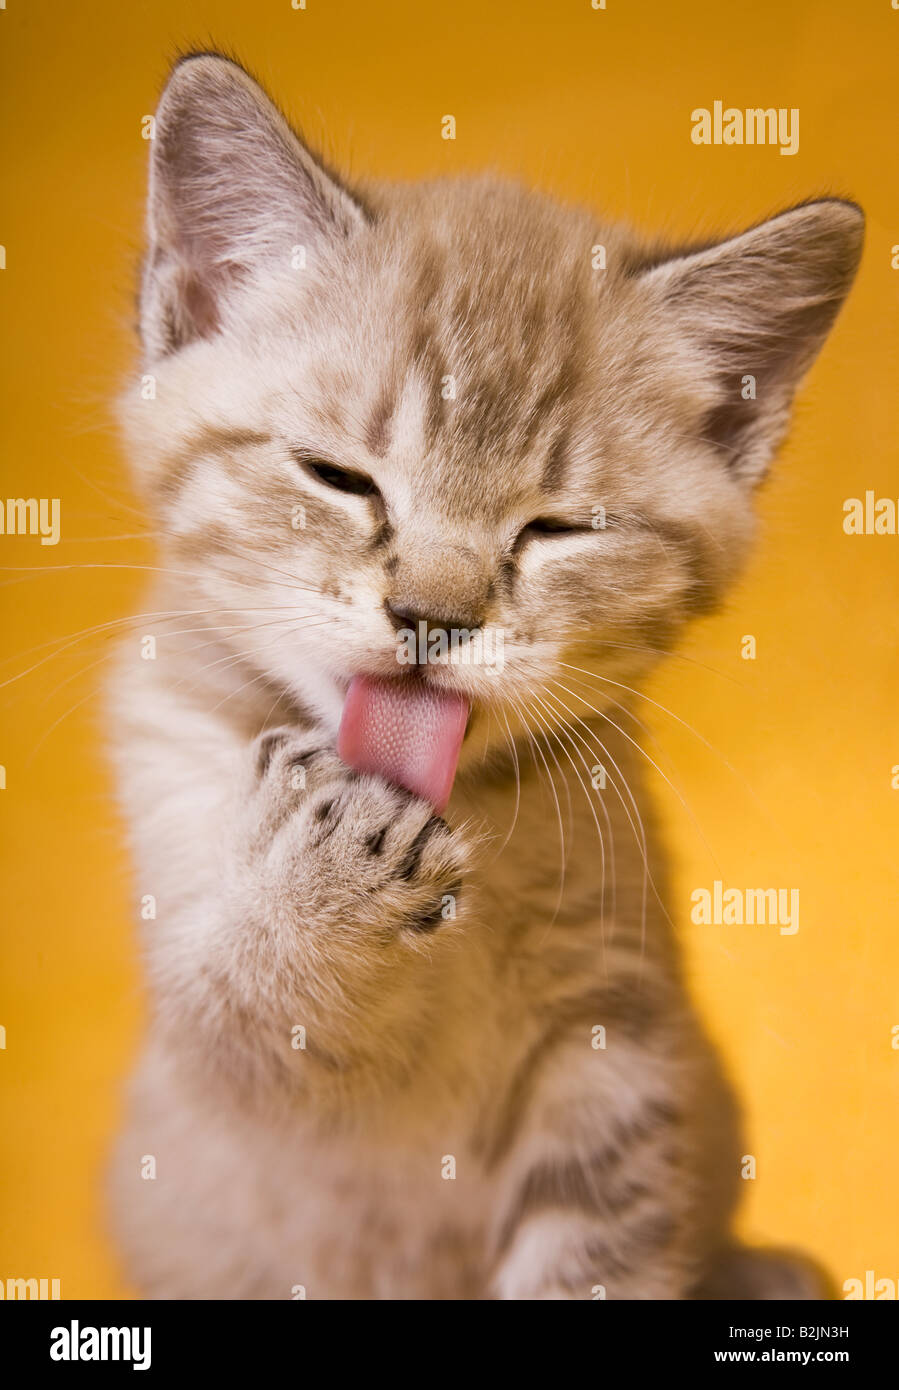 Cute kitten licking paw on golden background Stock Photo